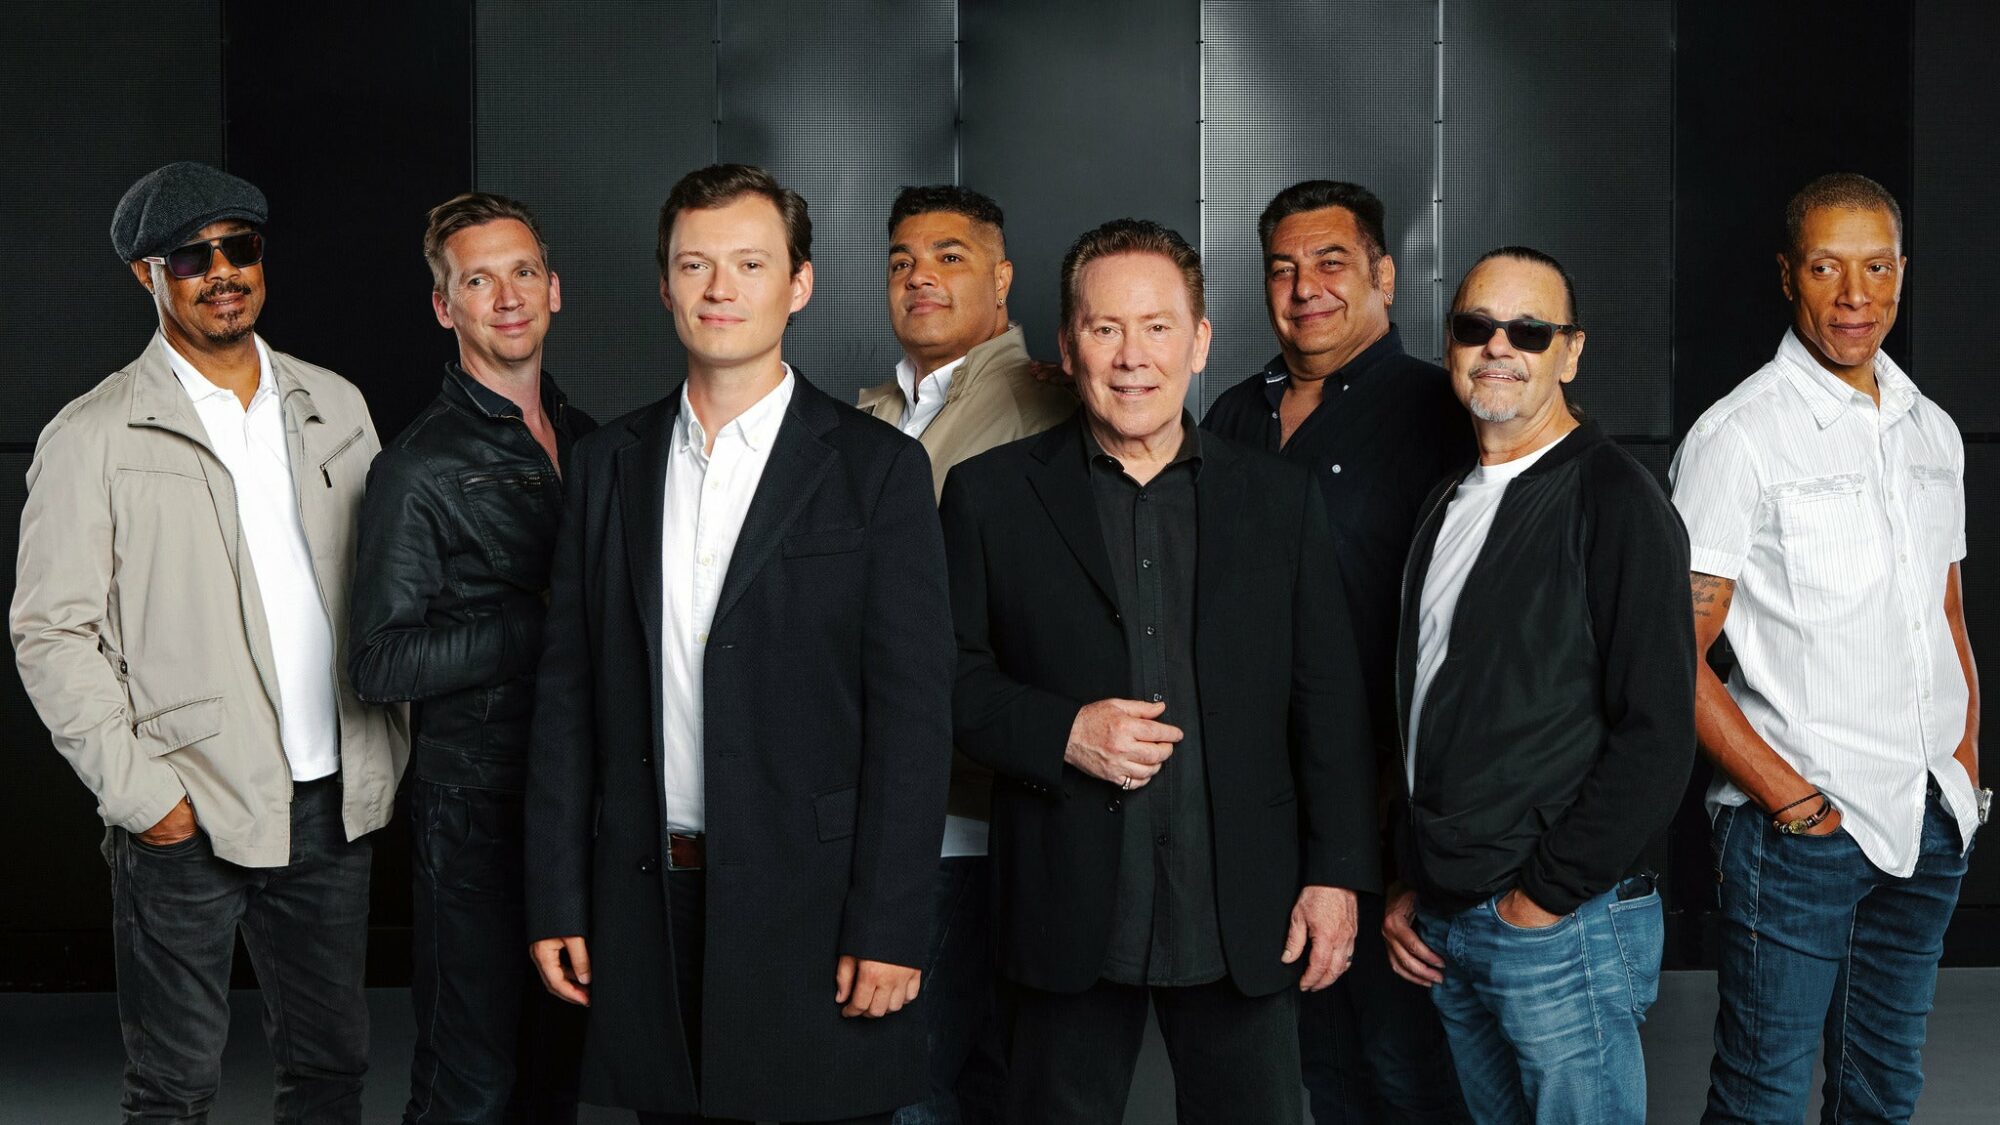 Image name UB40 at First Direct Arena Leeds the 1 image from the post UB40 (Live After Racing) at Doncaster Racecourse, Doncaster in Yorkshire.com.